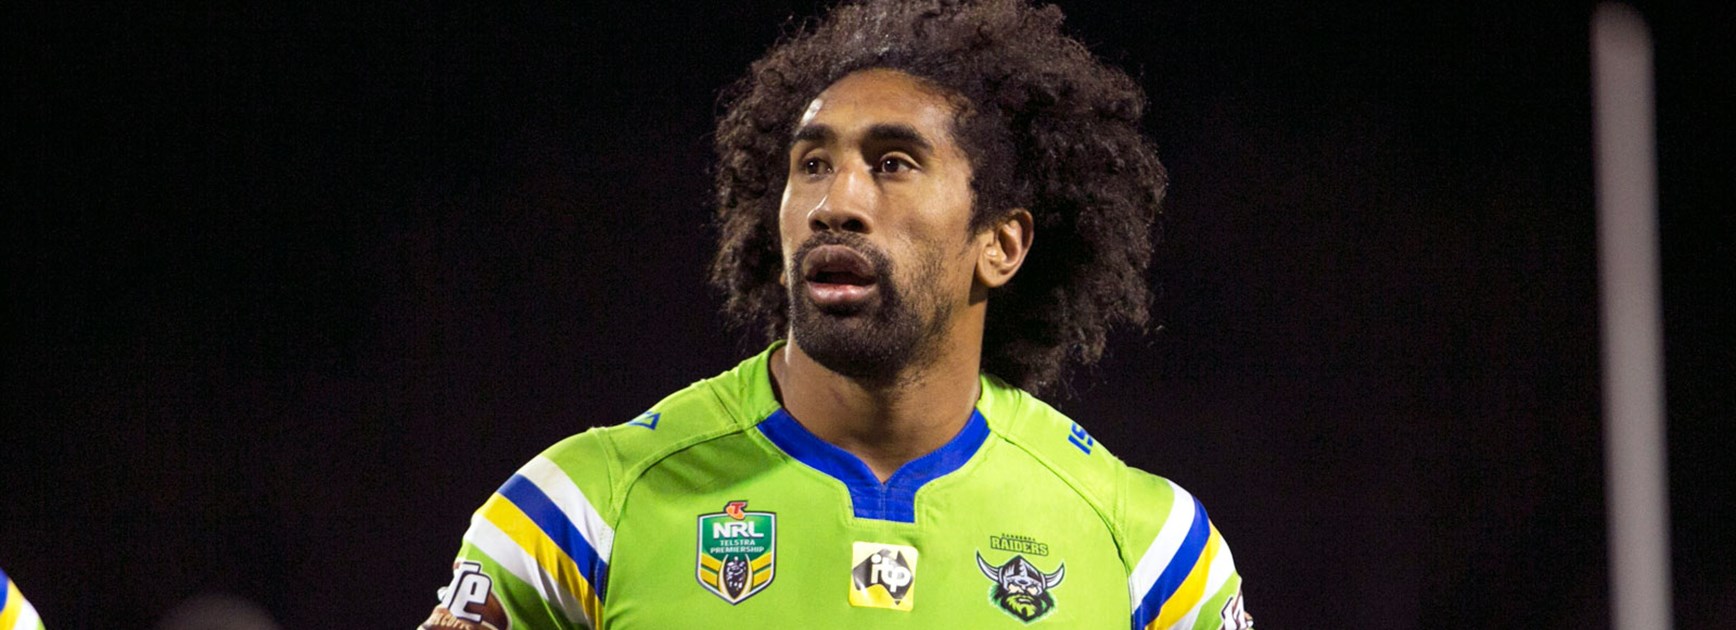 Soliola to face judiciary over Slater tackle